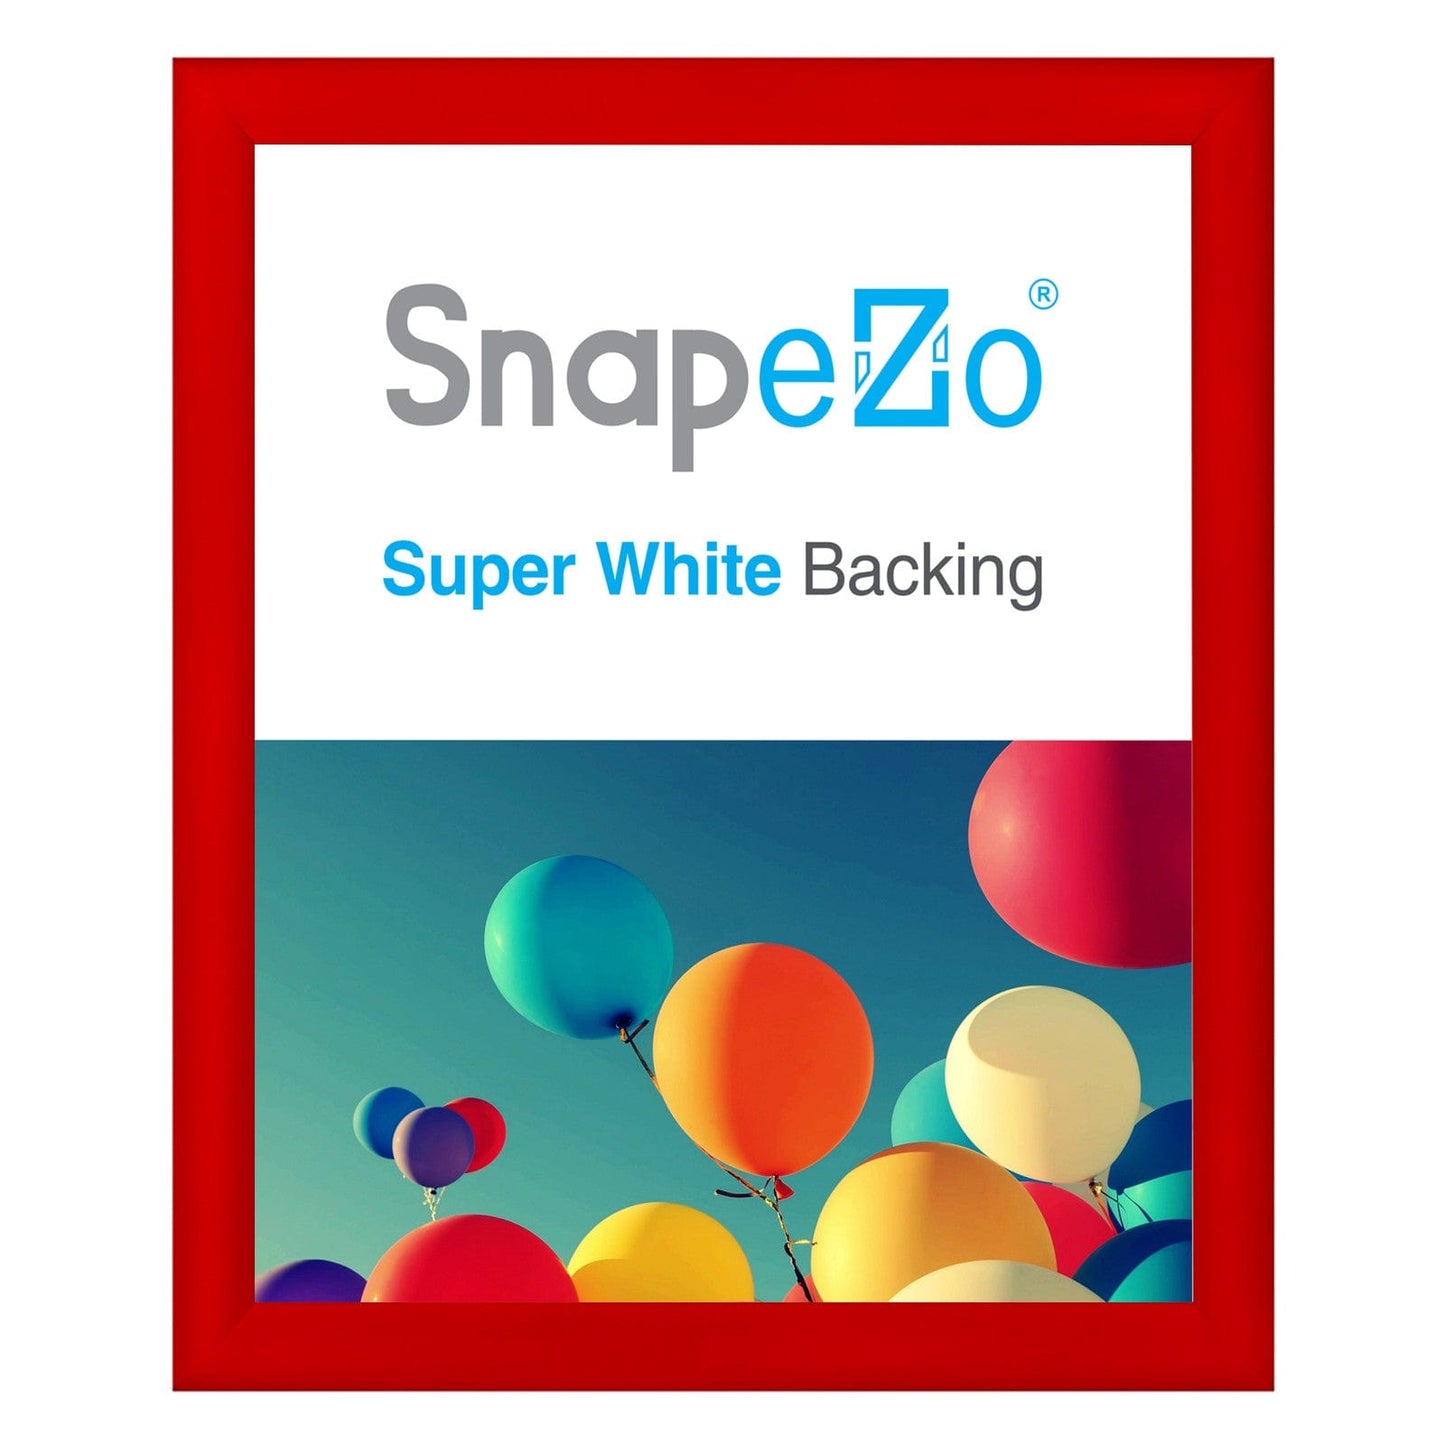 23x28 Red SnapeZo® Snap Frame - 1.2" Profile - Snap Frames Direct